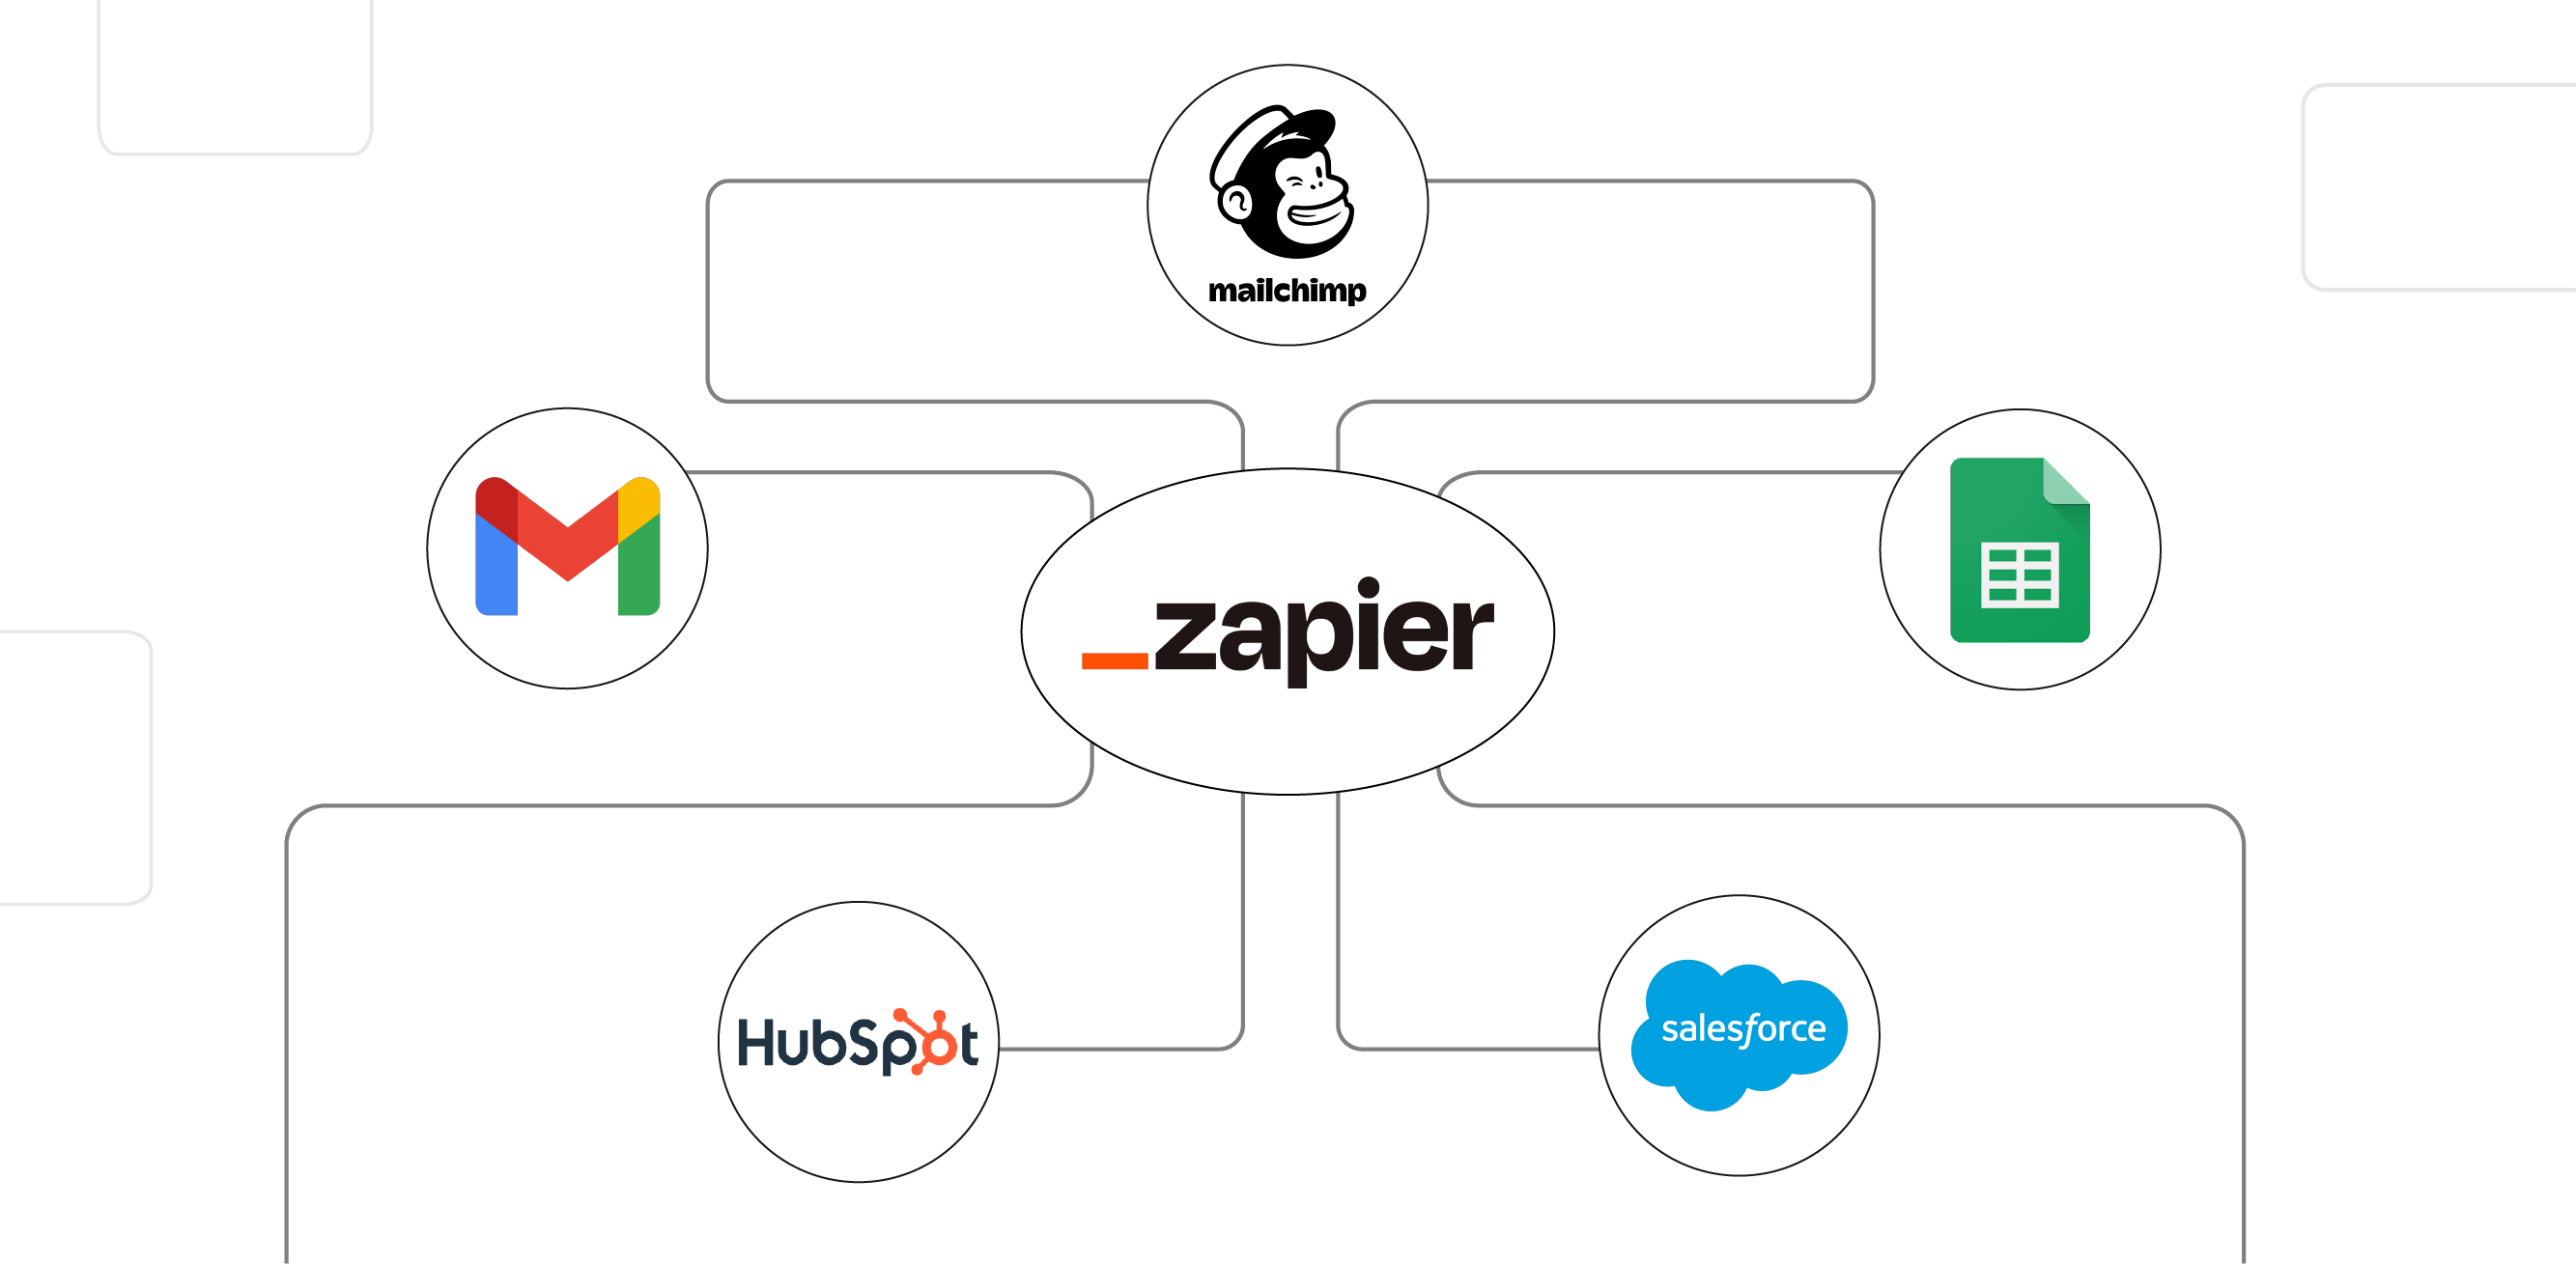 Zapier offers integrations for more than 30 different web services